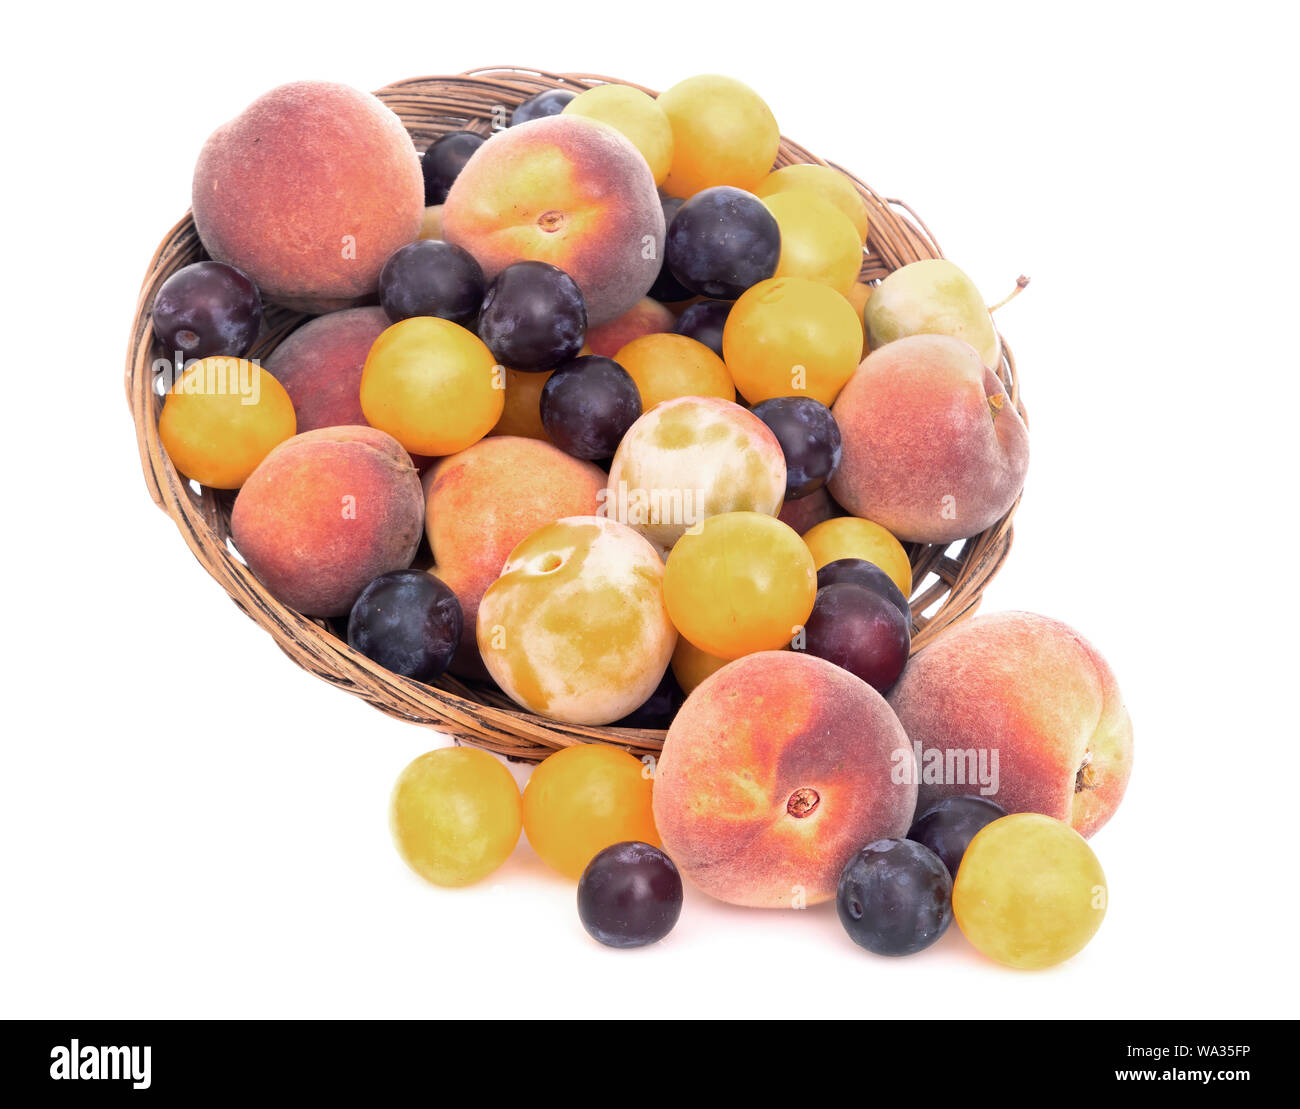 Old fashioned fruit from long abandoned orchard. Various tiny plums, greengages maybe and small, sweet peaches. Foraged natural fruit. Isolated. Stock Photo